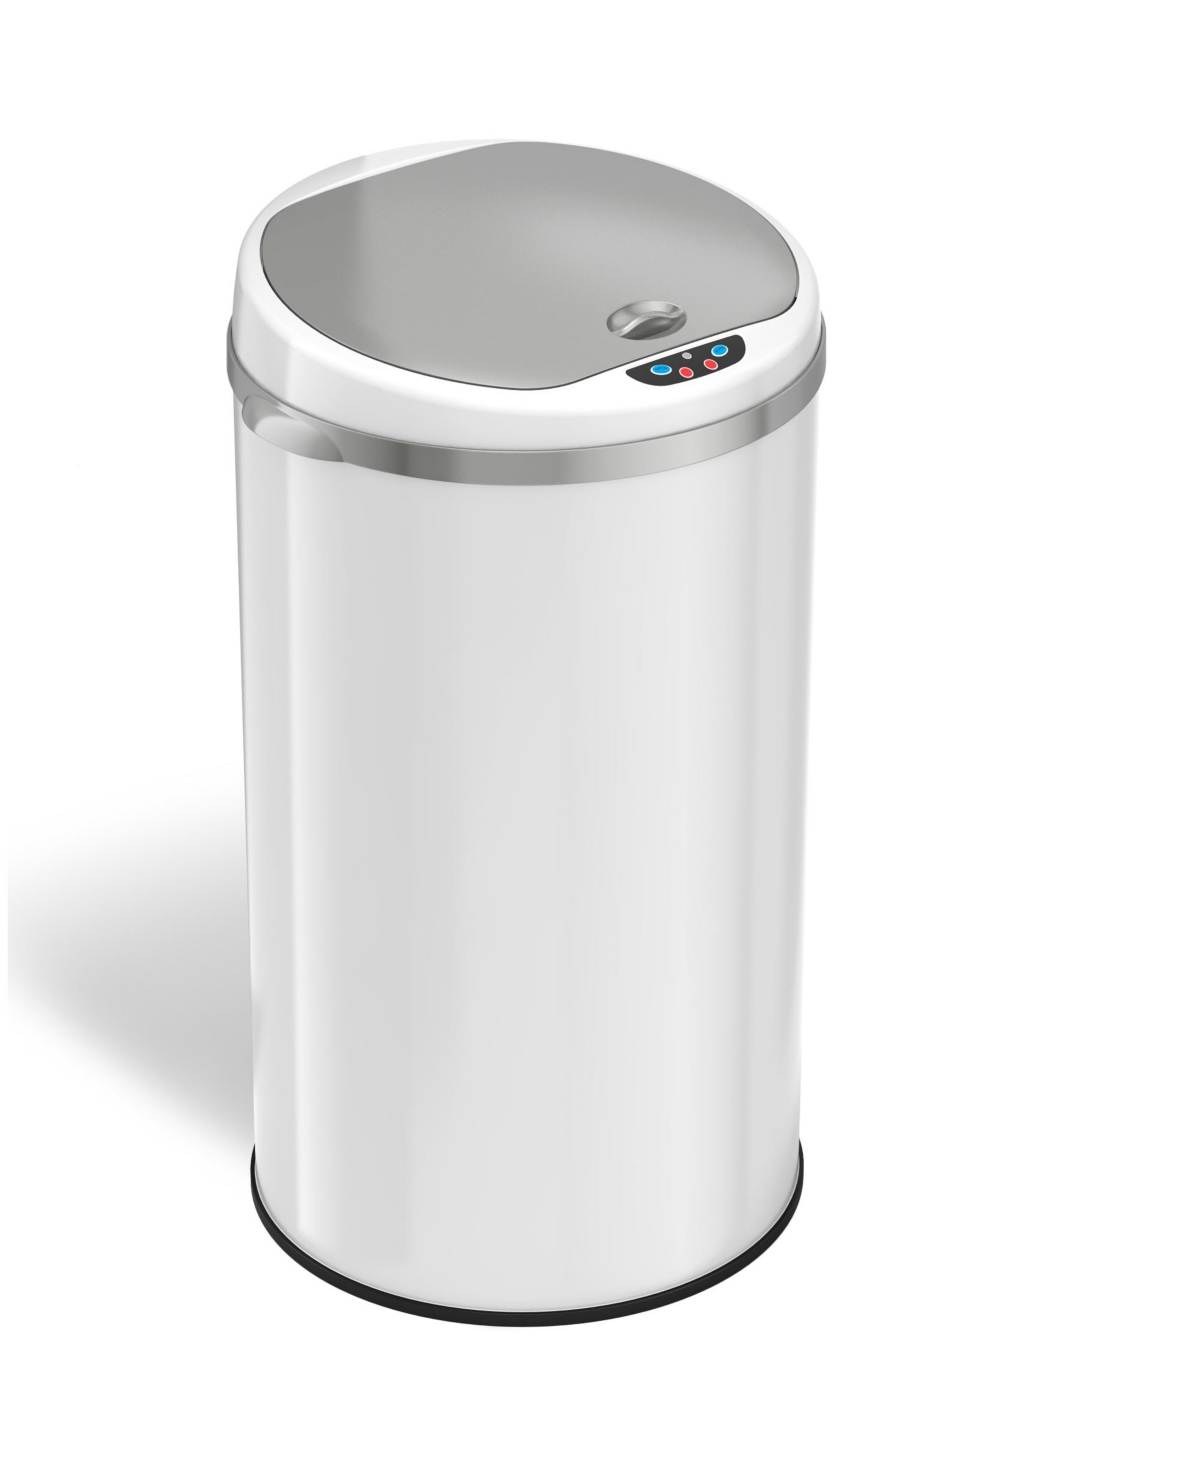 iTouchless 8 Gallon Round Sensor Trash Can with Deodorizer - White